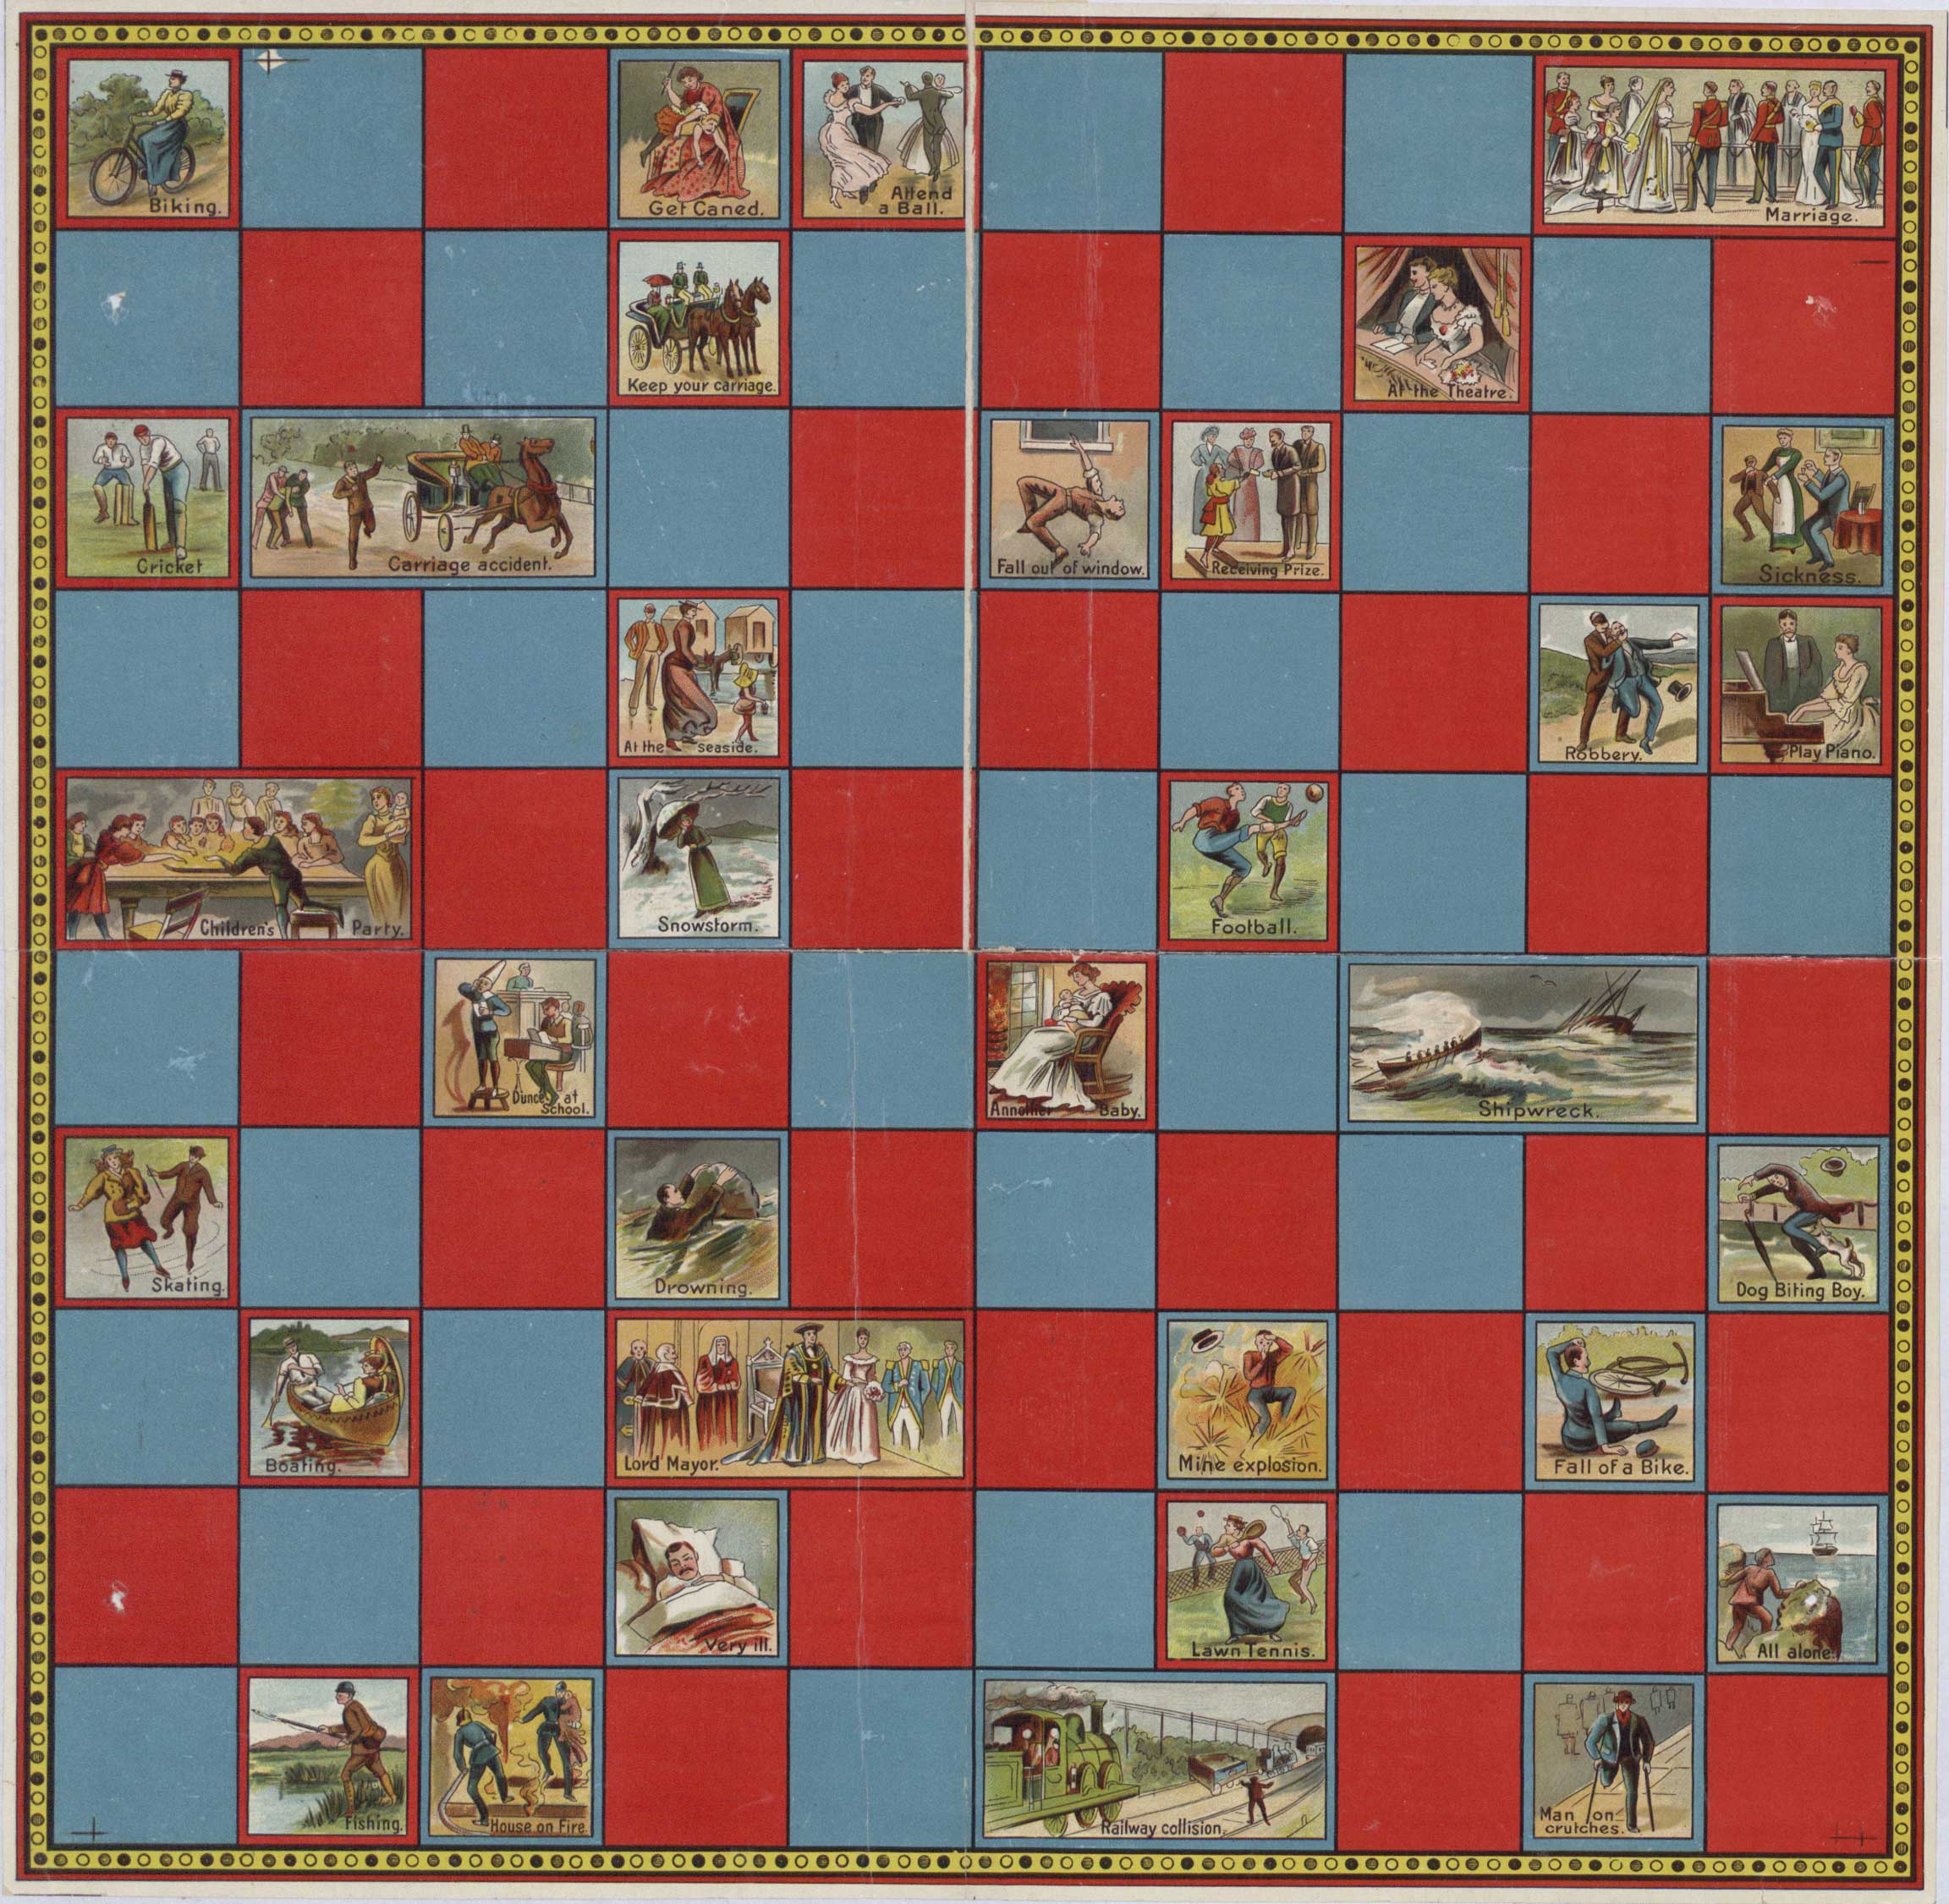 A game with a chequered surface of red and blue squares. Intermittent squares show illustrations of people doing different activities including ‘biking’, ‘get caned’, and ‘attend a ball’.